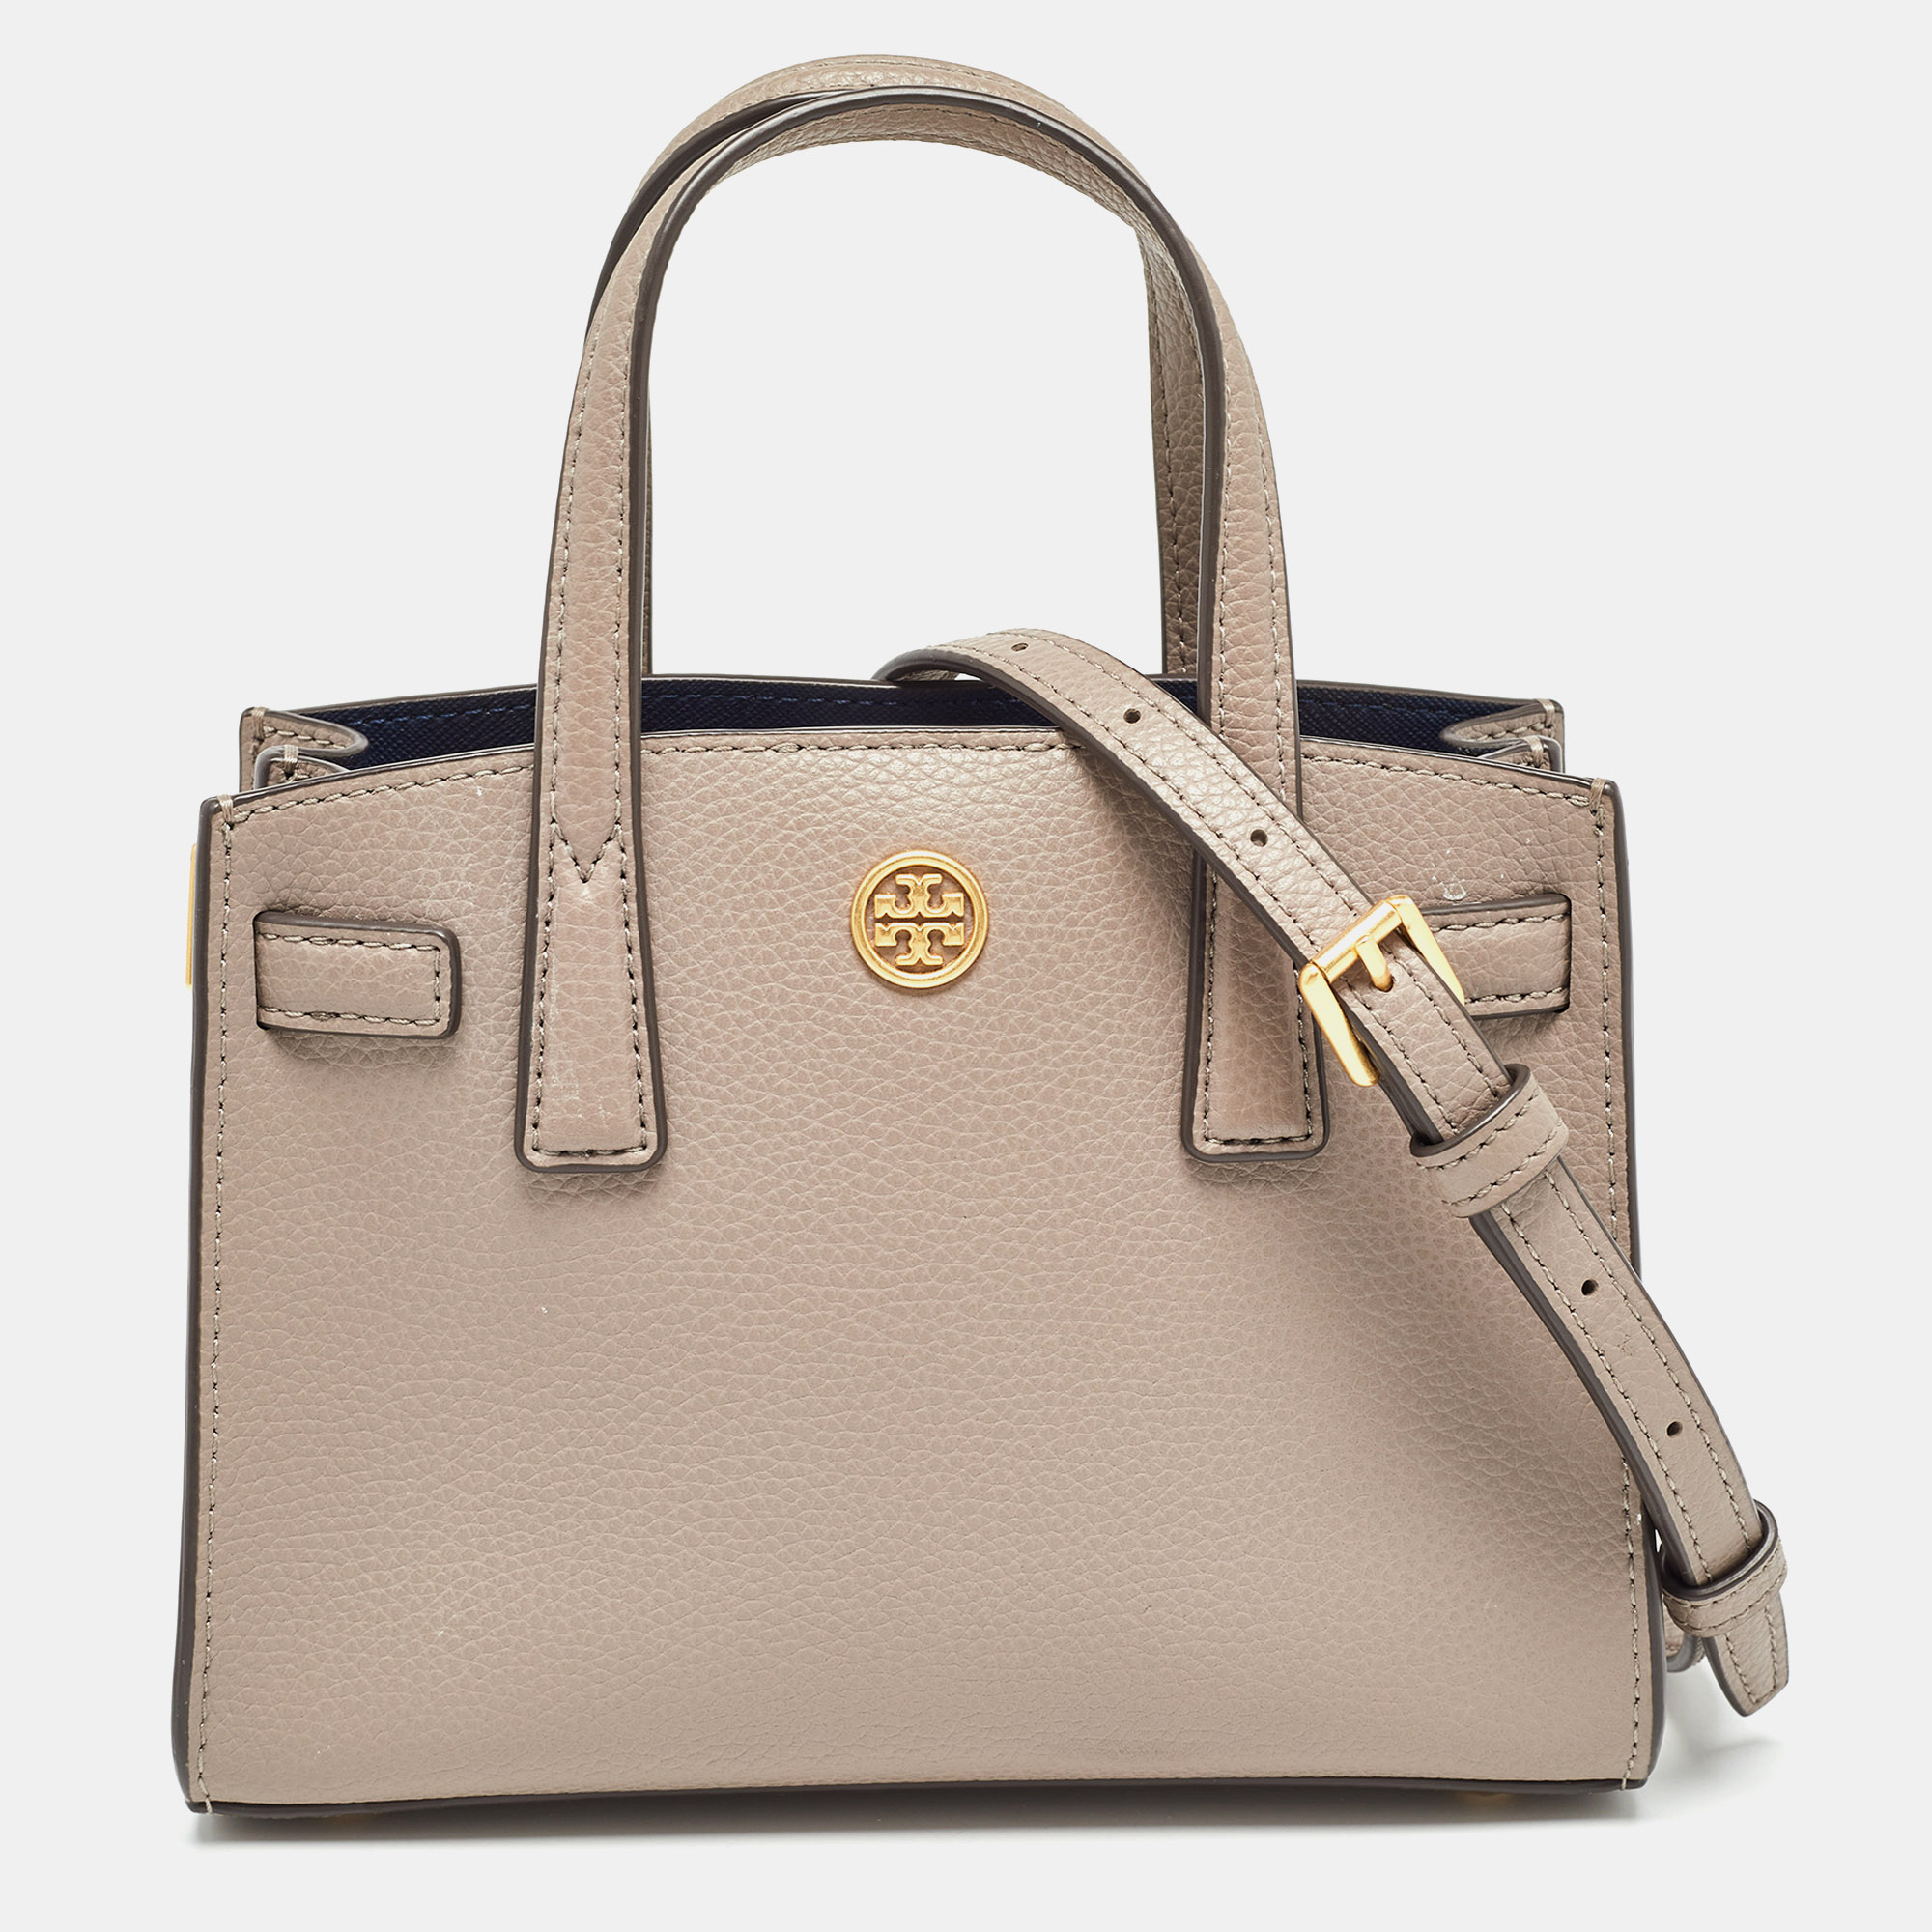 Pre-owned Tory Burch Brown Leather Mini Walker Tote